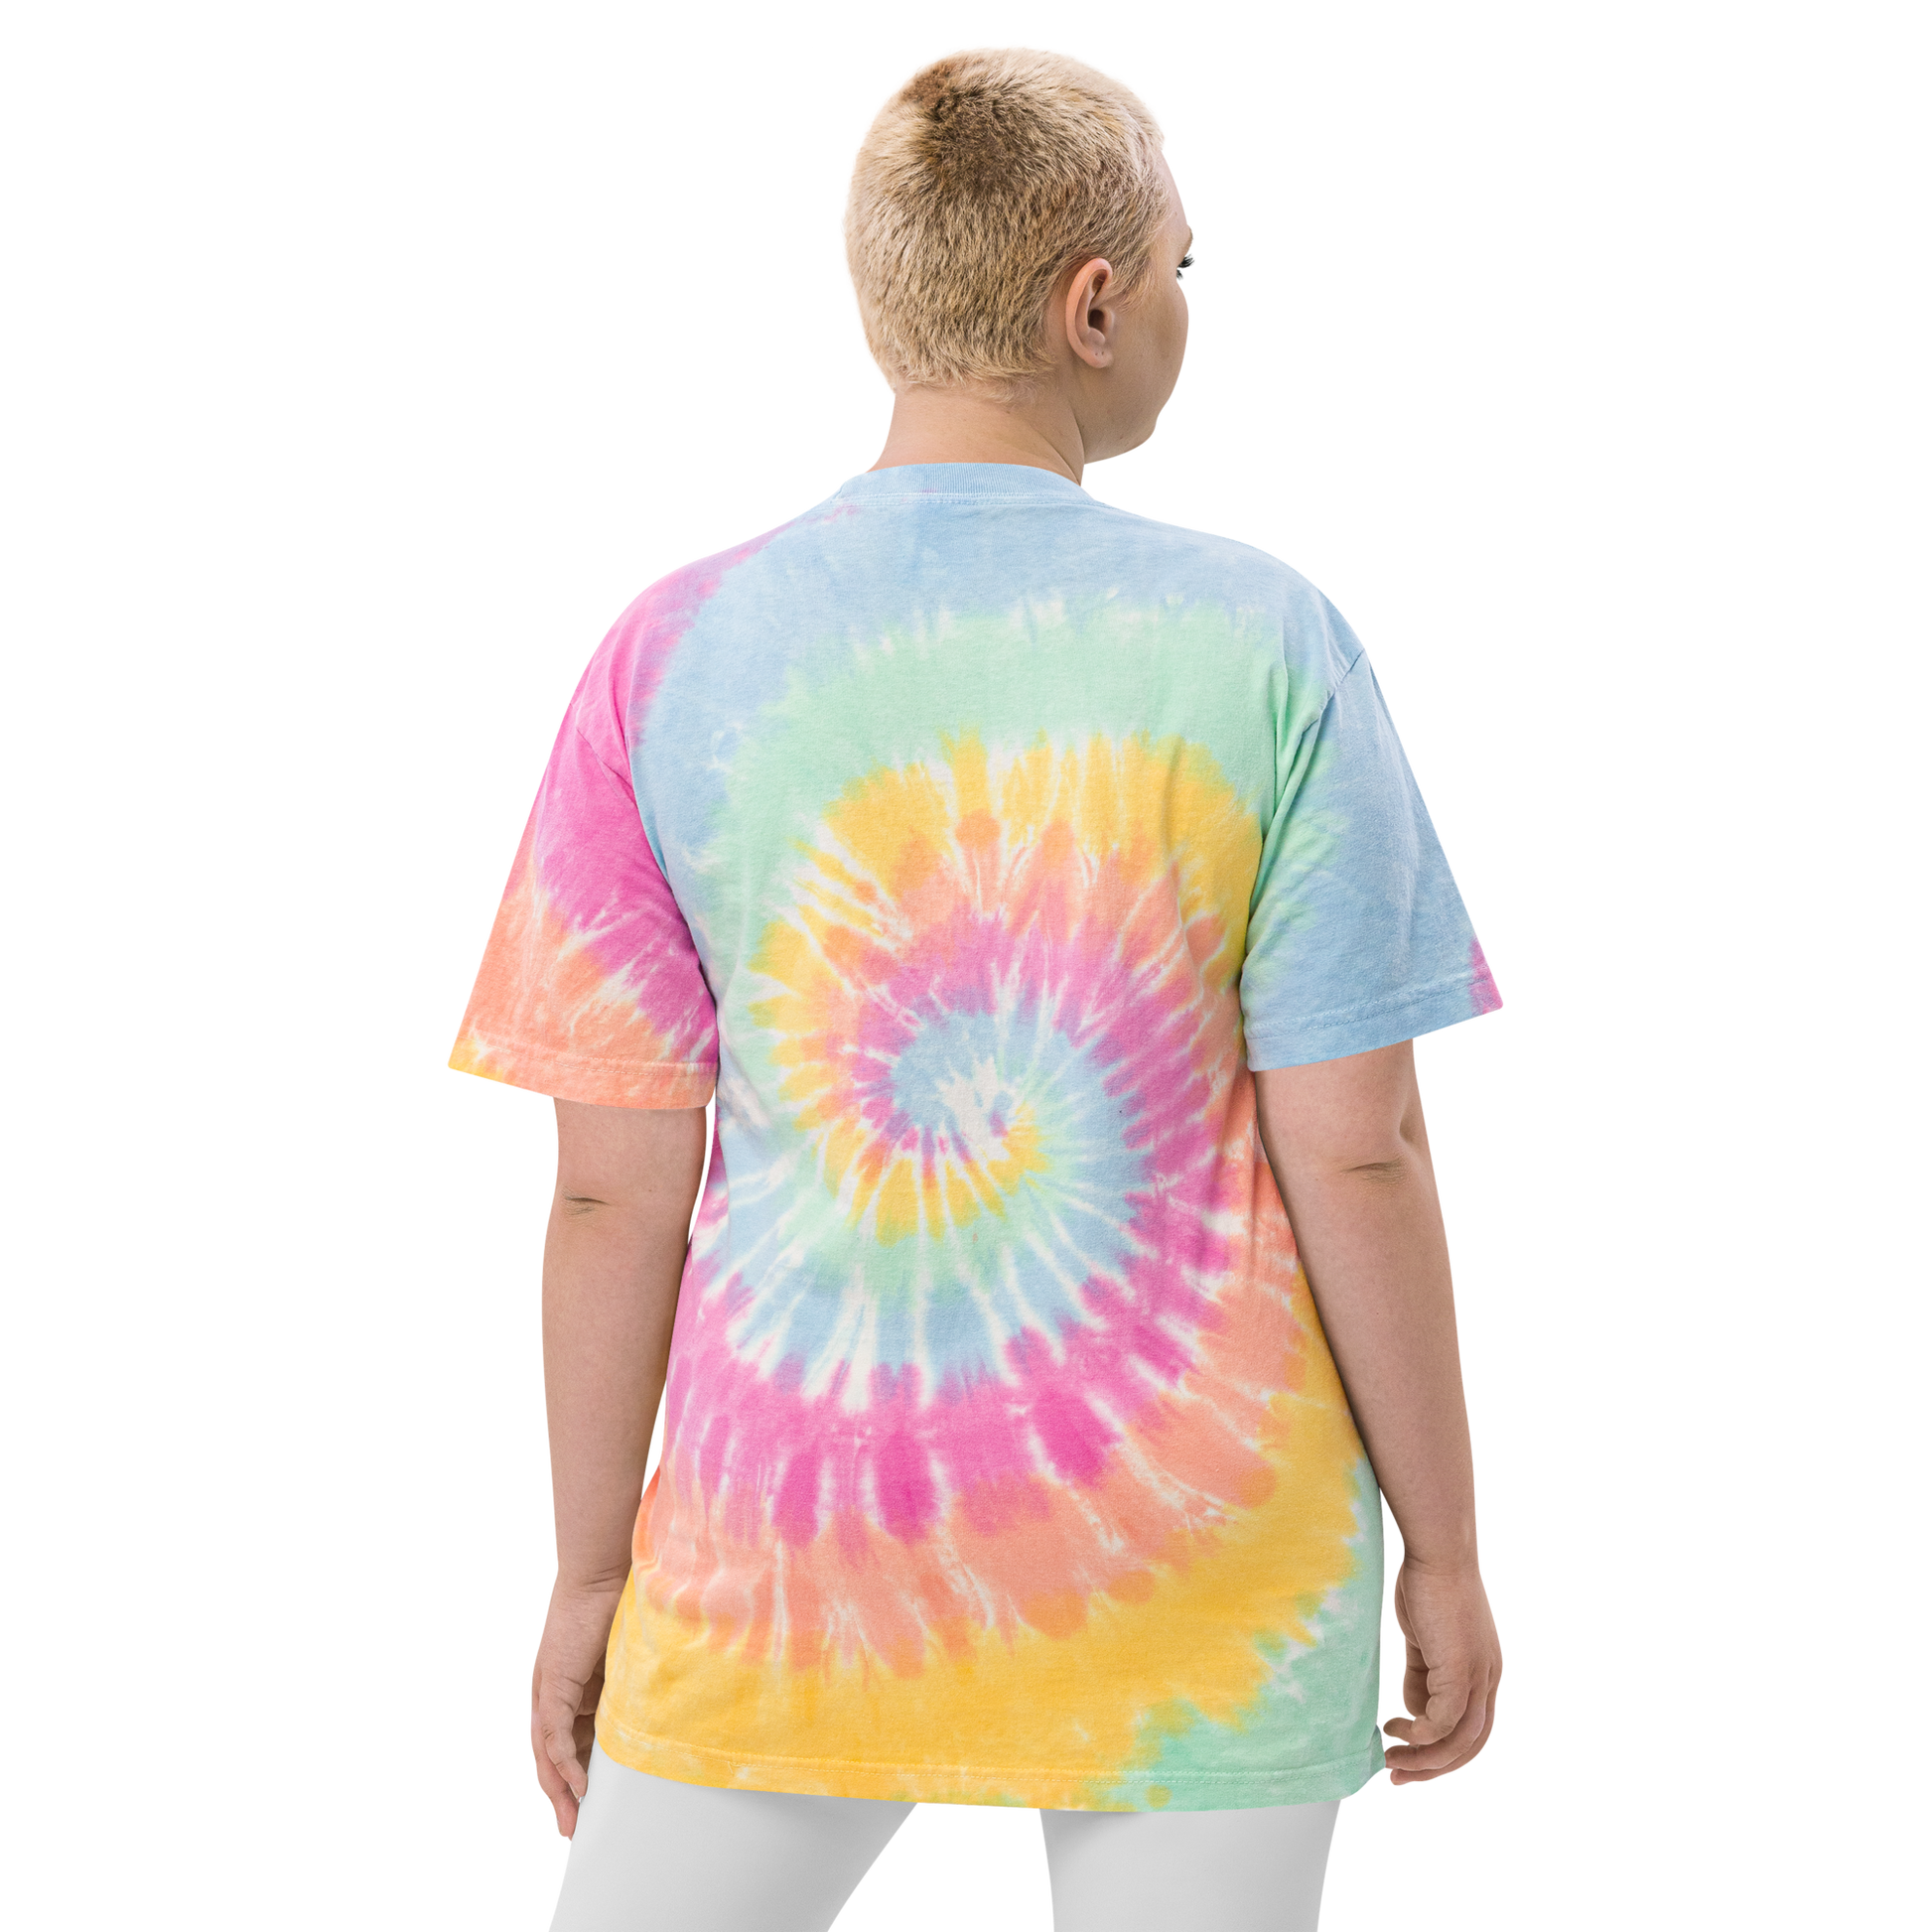 YHM Designs - YQG Windsor Oversized Tie-Dye T-Shirt - Crossed-X Design with Airport Code and Vintage Propliner - White Embroidery - Image 12